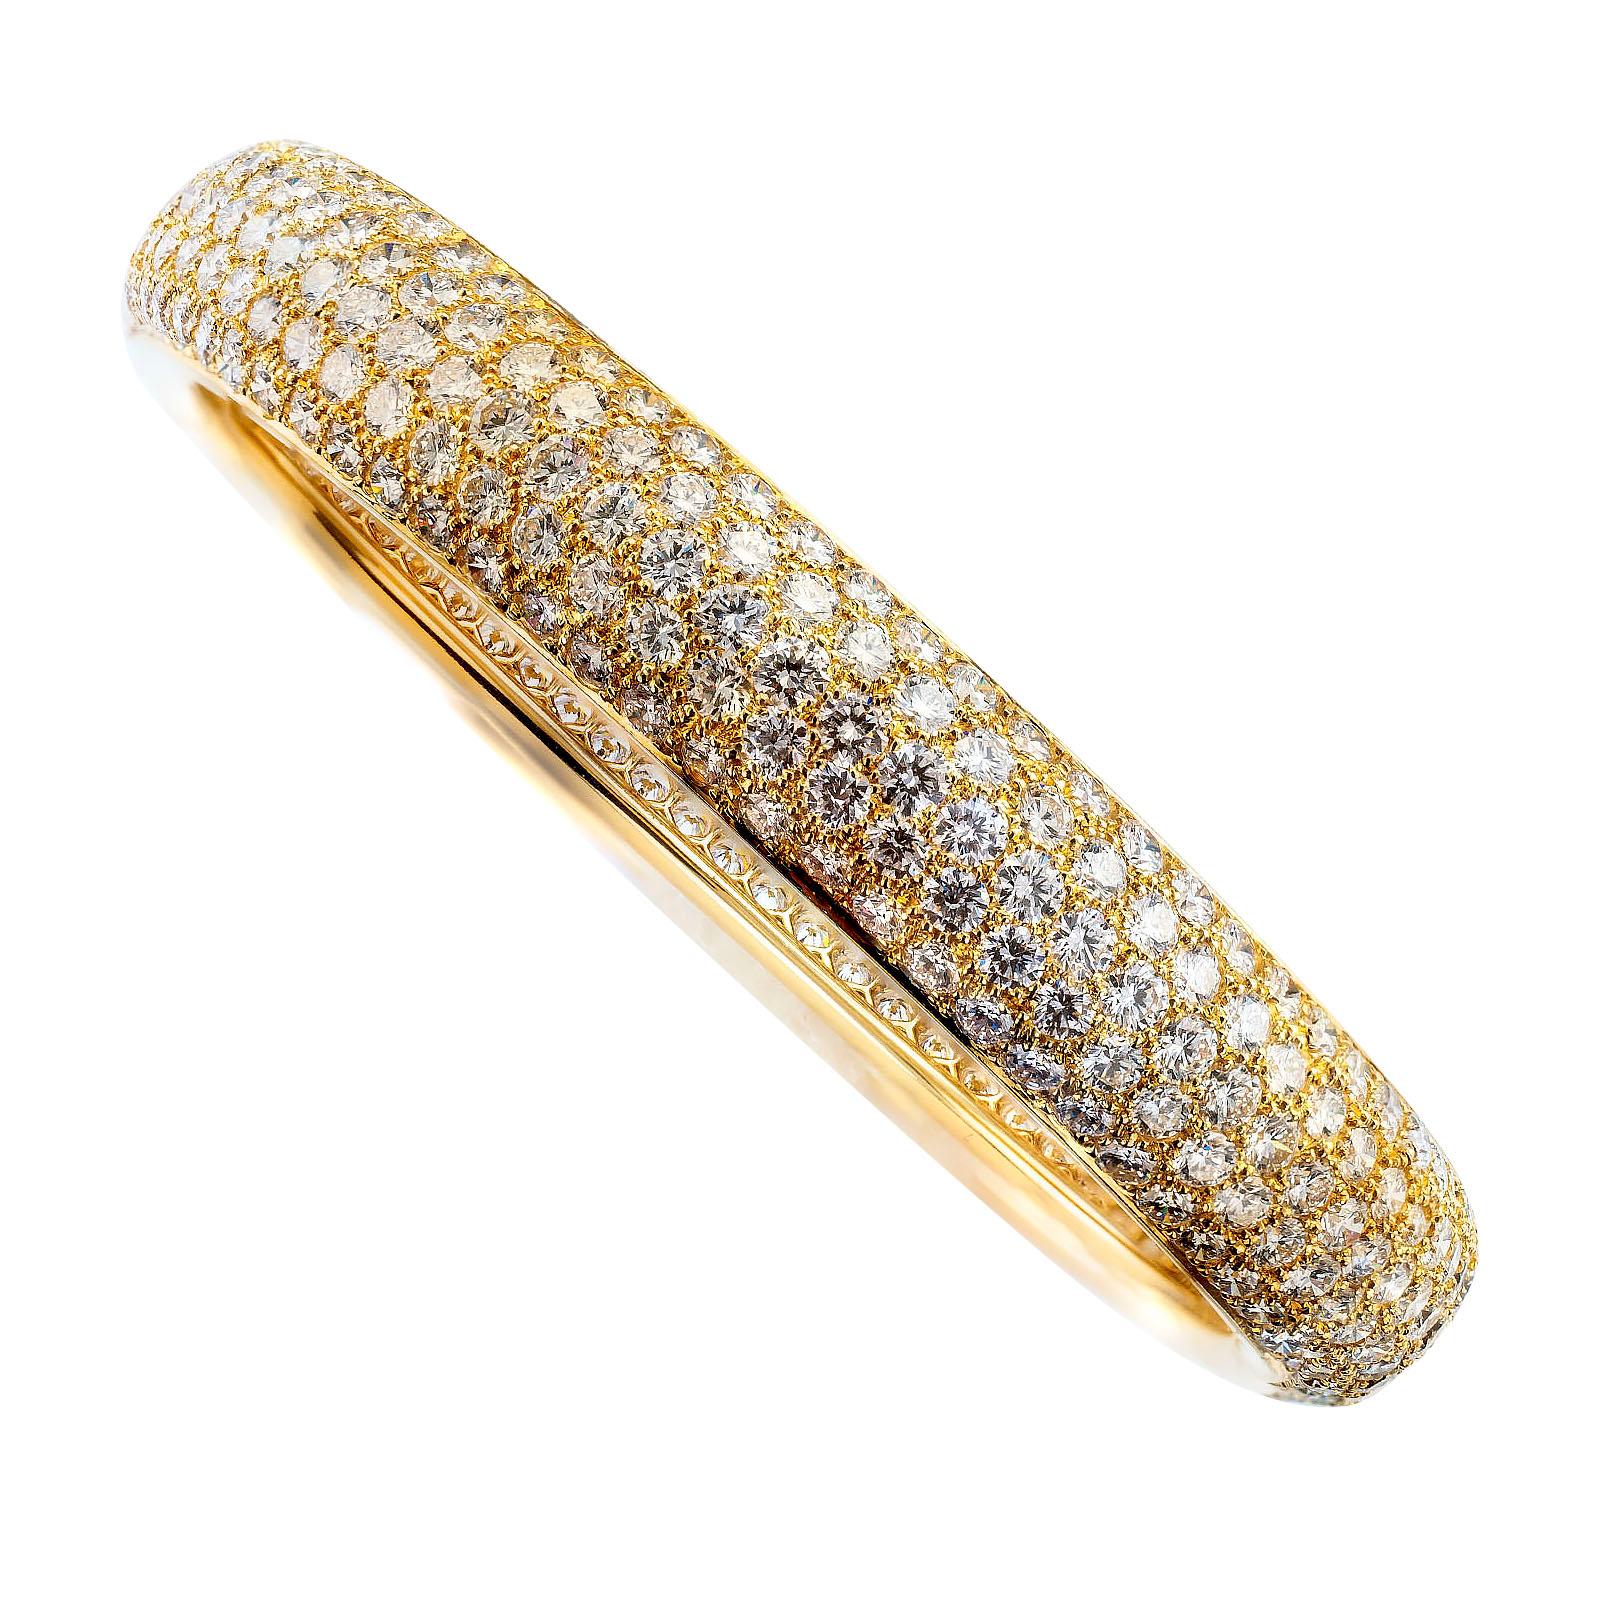 Cartier “Etincelle” wide diamond pavé yellow gold bangle bracelet.


DETAILS:
DIAMONDS:  three hundred seventy round brilliant-cut diamonds all the way around totaling approximately 18.41 carats, approximately E – F color, VS-VVS clarity.

METAL: 